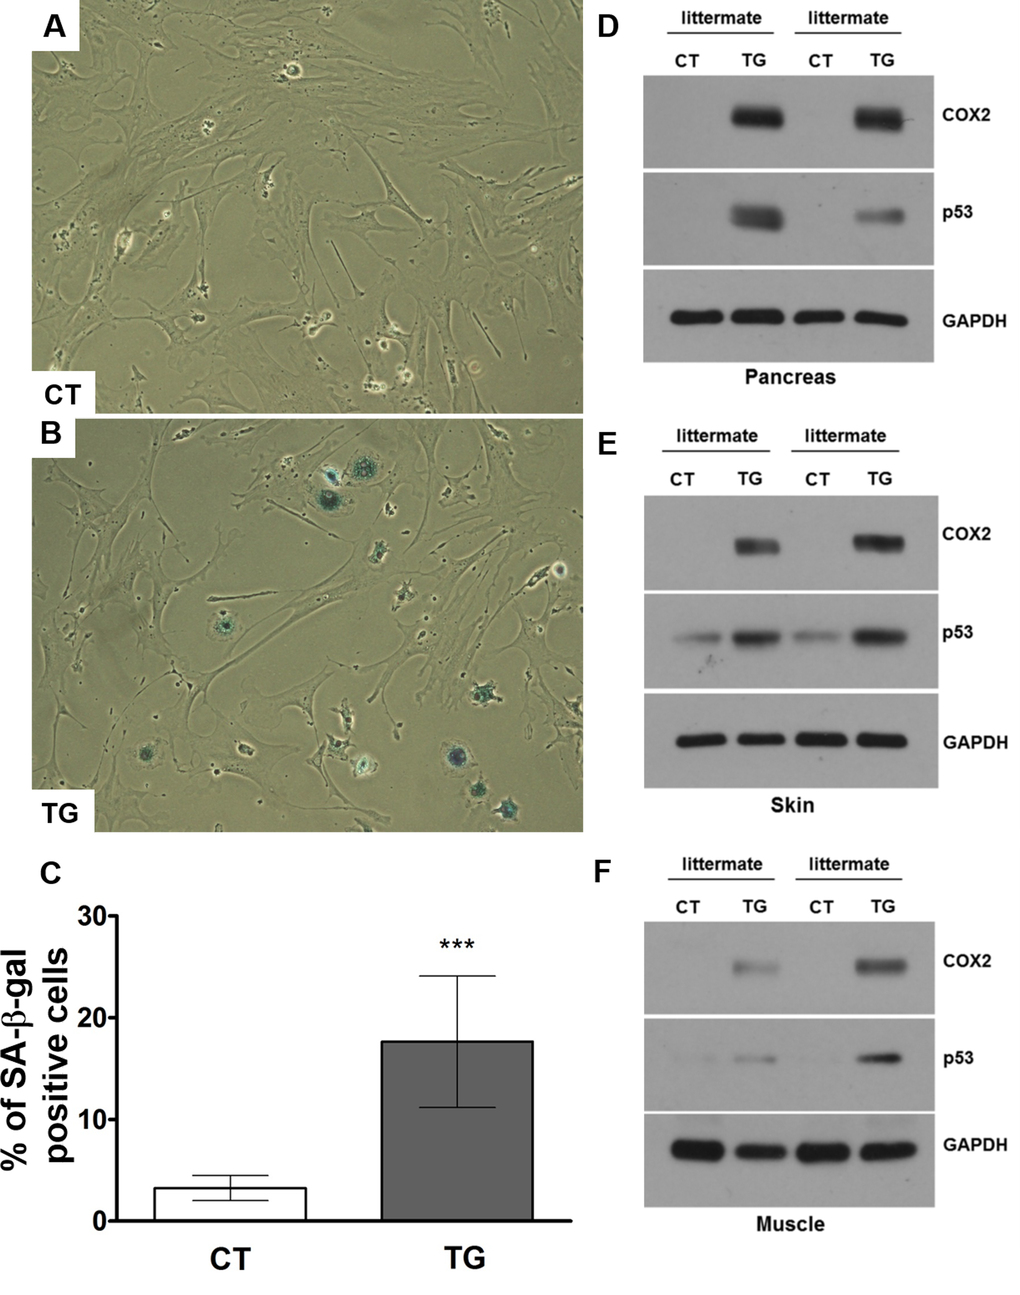 (A) and (B) Adult mouse lung fibroblasts from control and COX2 transgenic mice were incubated with 4-hydroxytamoxifen for 24 hours to induce COX2 expression in transgenic fibroblasts. The cells were cultured in the regular culture medium for 48 hours before SA-β-Gal staining. Representative pictures from 3 independent experiments are shown. Quantification results are shown in (C). (D-F) Western blot analysis of COX2 and p53 in pancreas (D), skin (E), and muscle (F) tissues of control and COX2 transgenic littermates.